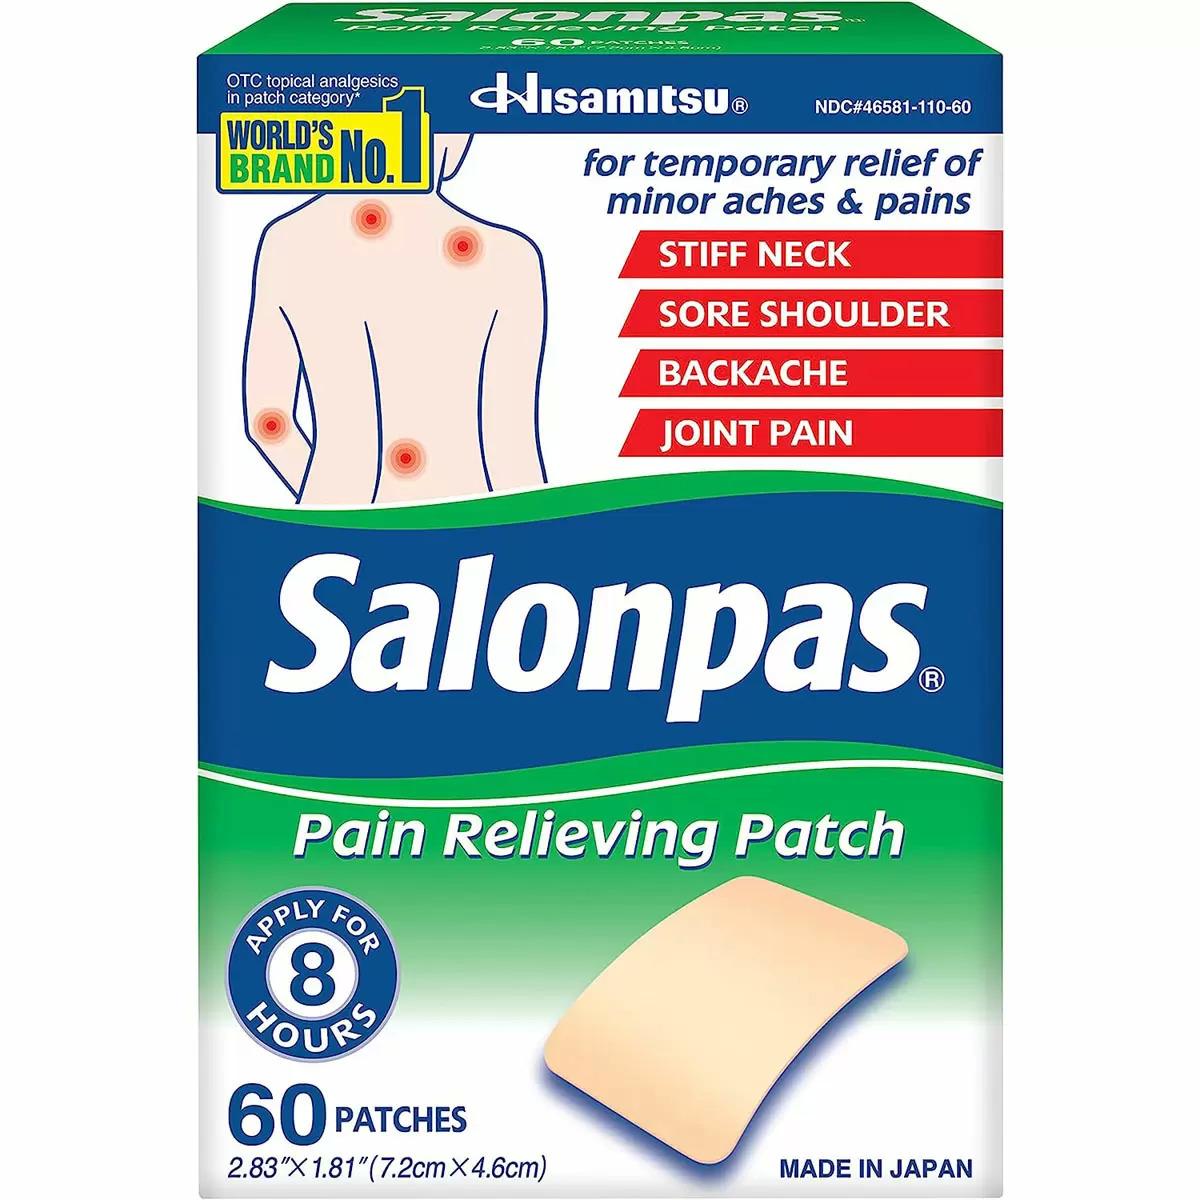 Salonpas Muscle Soreness Pain Relieving Patch for $6.13 Shipped